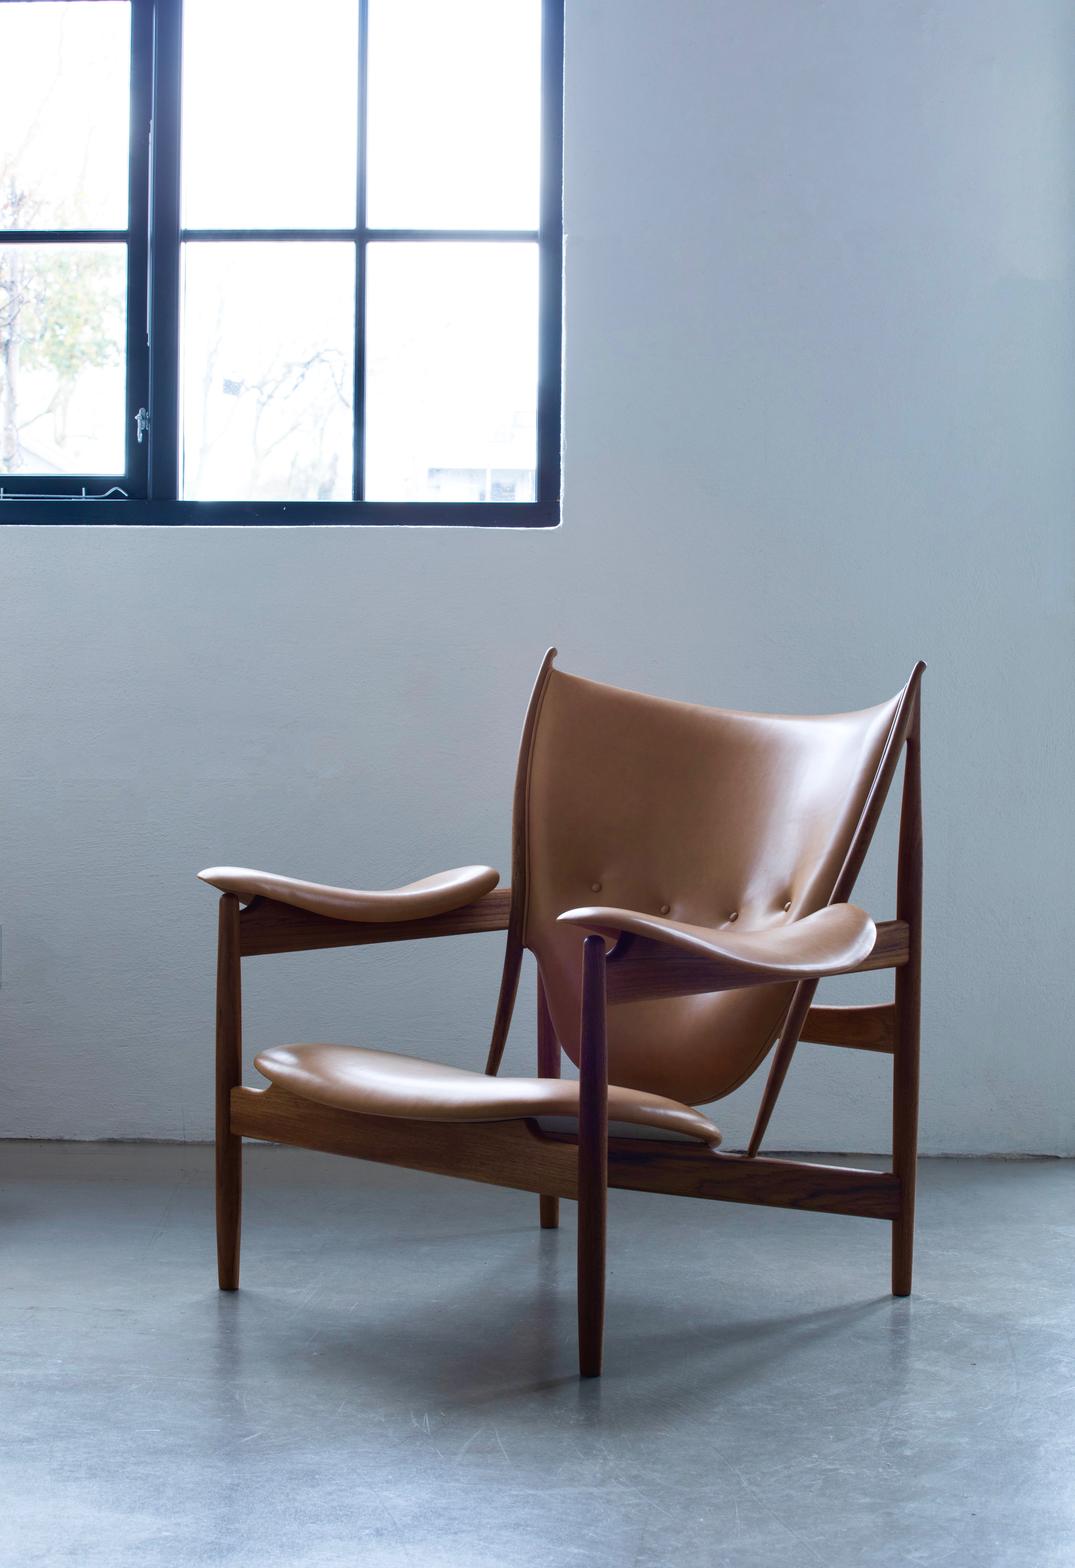 Chair designed by Finn Juhl in 1949, relaunched in 2002.
Manufactured by House of Finn Juhl in Denmark.

The iconic Chieftain Chair is one of Finn Juhl’s absolute masterpieces, representing the peak of his career as a furniture designer. At its